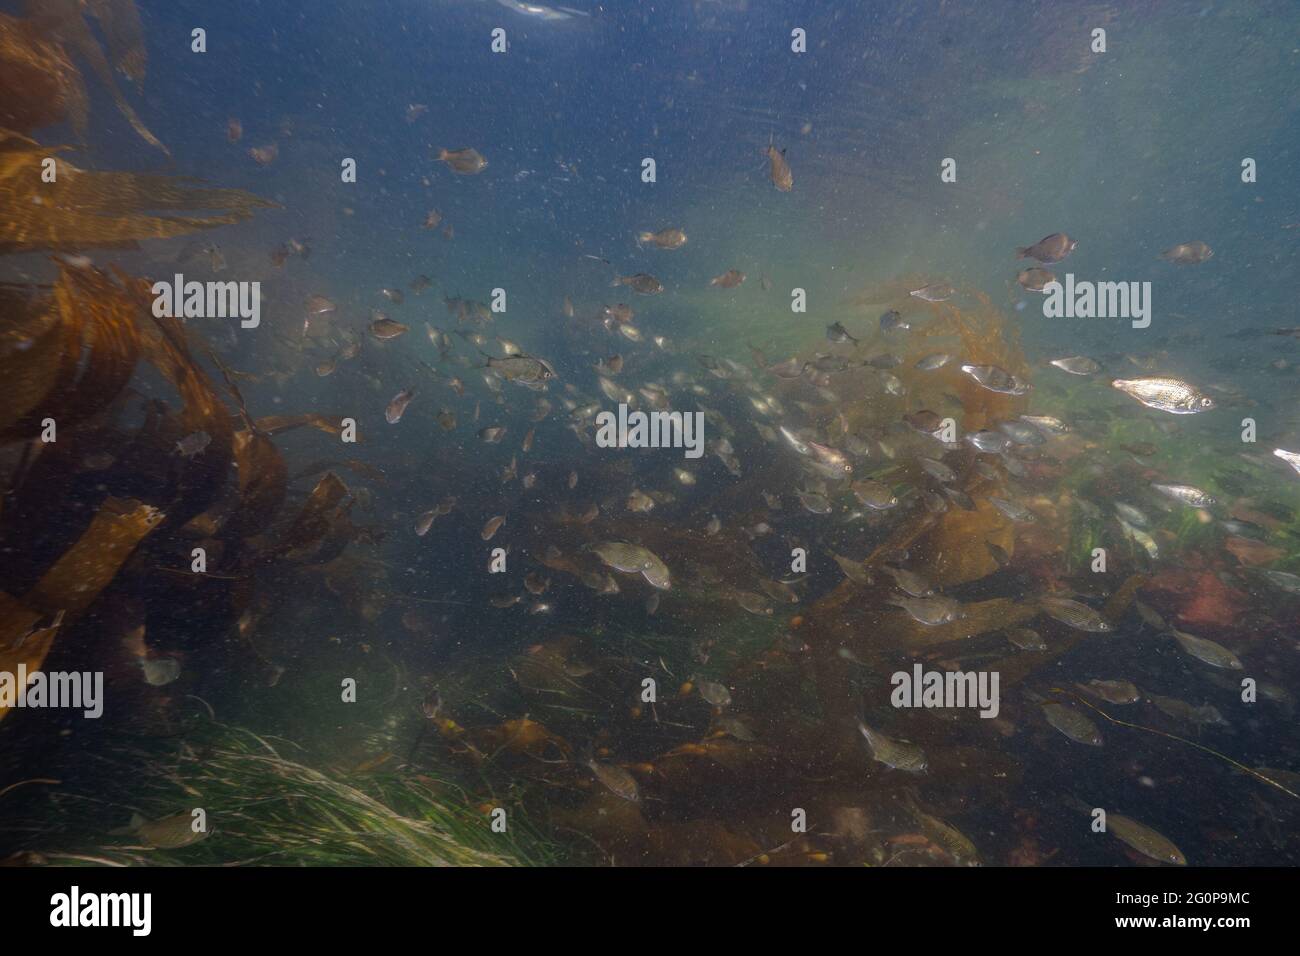 A large school of Shiner perch swimming in the Kelp forest in the Northwest Coast of Vancouver Island. Stock Photo